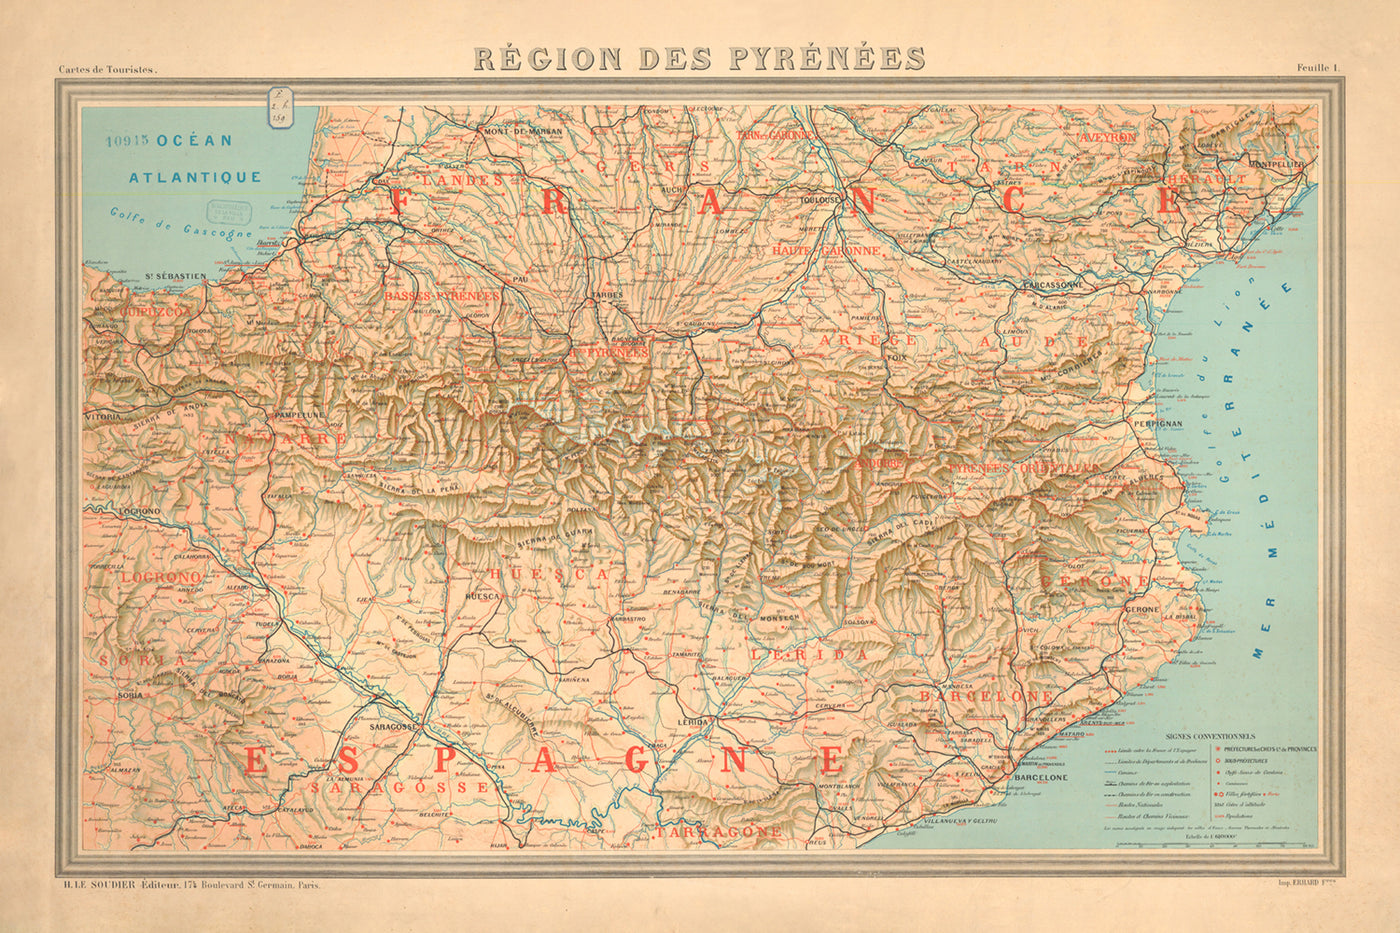 Old Map of the Pyrenees Mountains, 1920: Southern France and Northern Spain